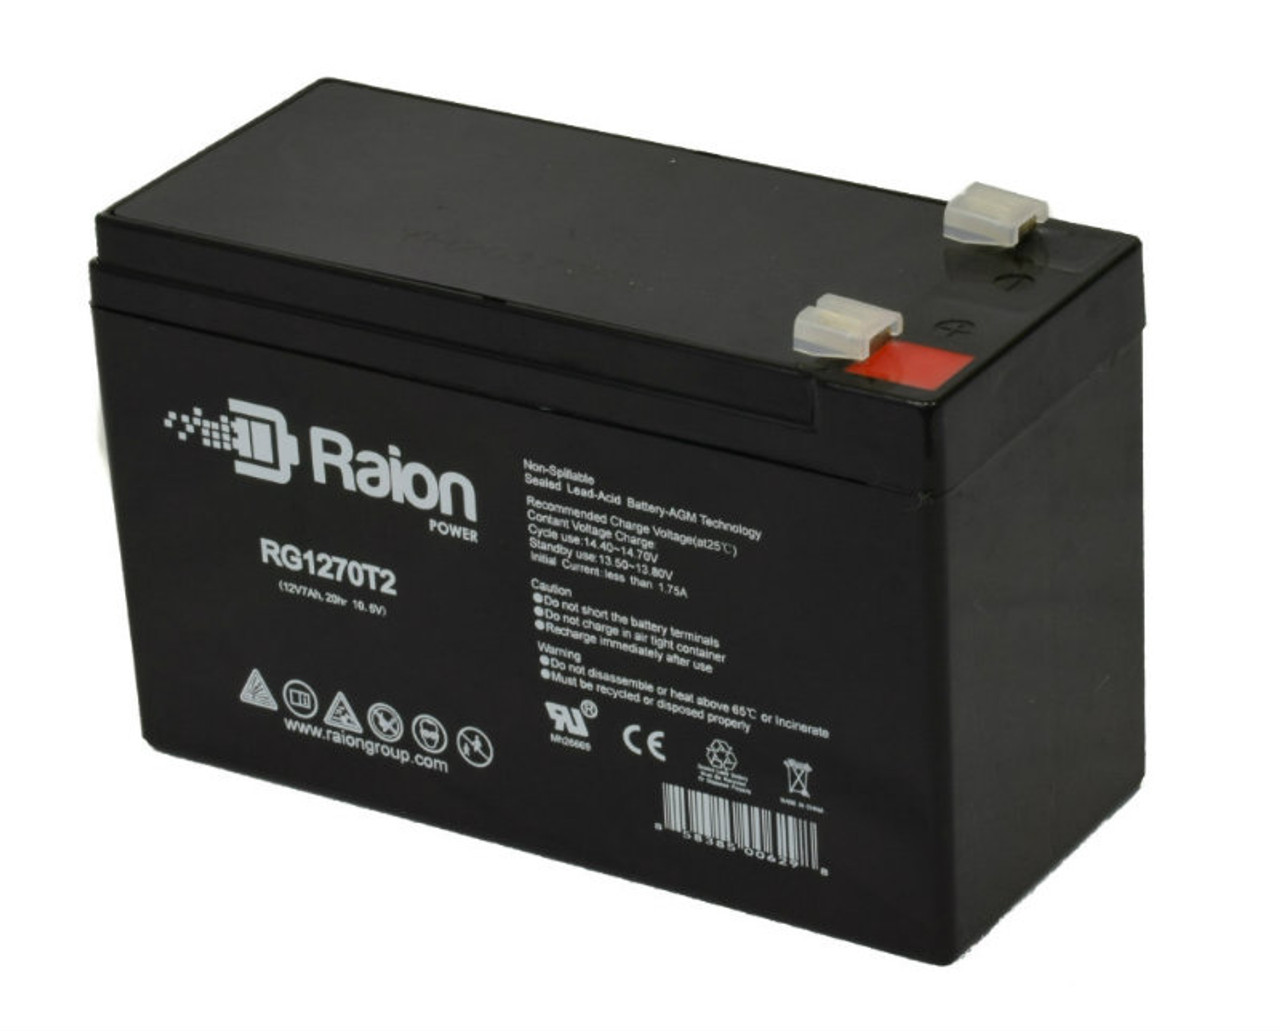 Raion Power Replacement 12V 7Ah RG1270T1 Fire Alarm Battery for Altronix AL300ULXR